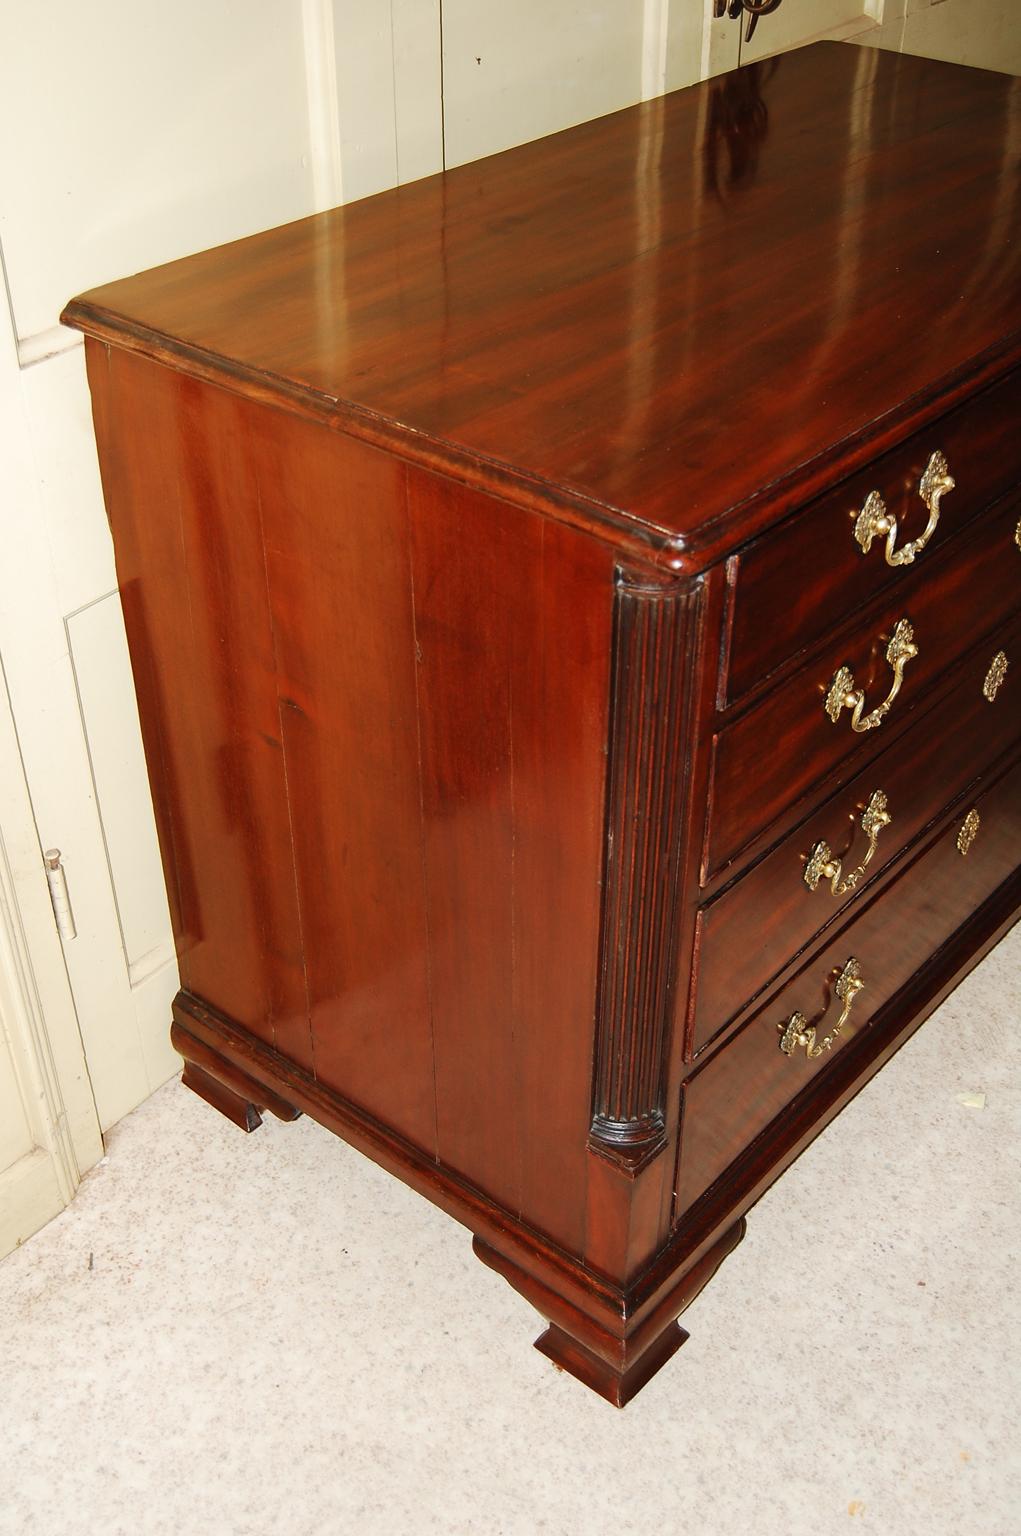   English Georgian Chippendale mahogany gentleman's chest of four graduated drawers.  This fine chest has a  mahogany fitted top drawer with sliding baize inlaid dressing panel that when slid back reveals small drawers and open compartments for